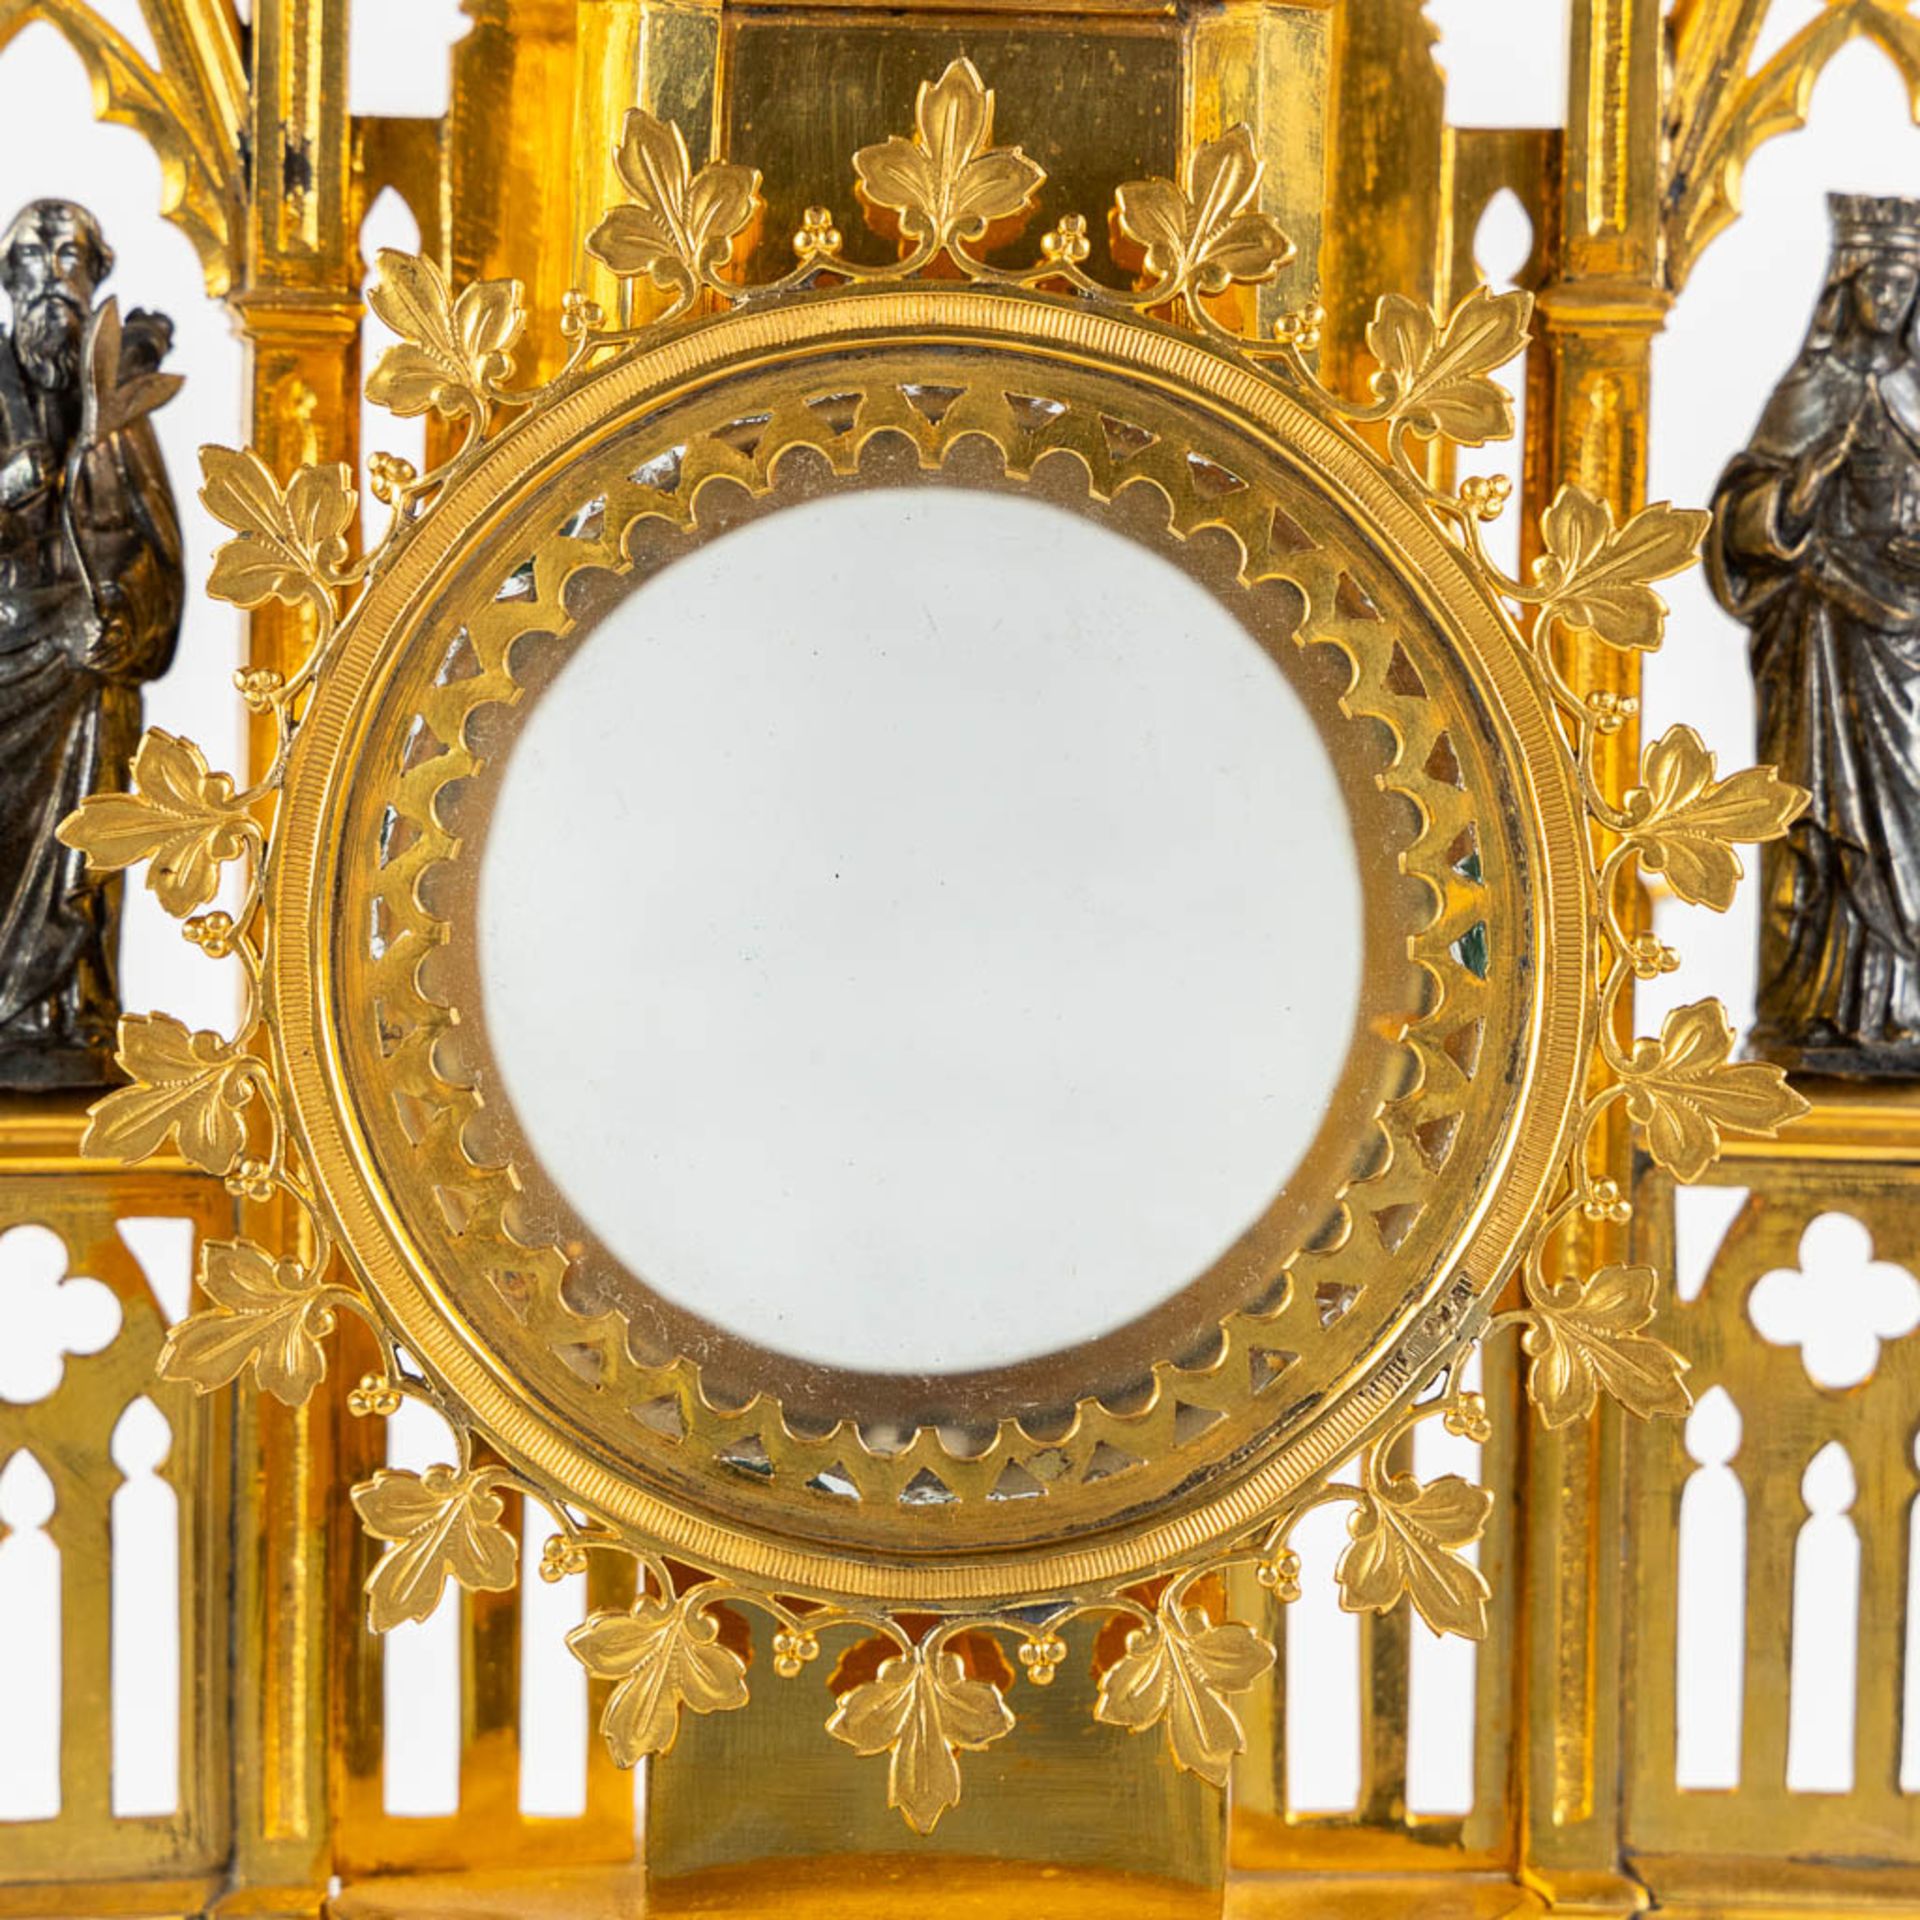 A Tower monstrance, gilt and silver plated brass, Gothic Revival. 19th C. (W:21,5 x H:58 cm) - Image 5 of 22